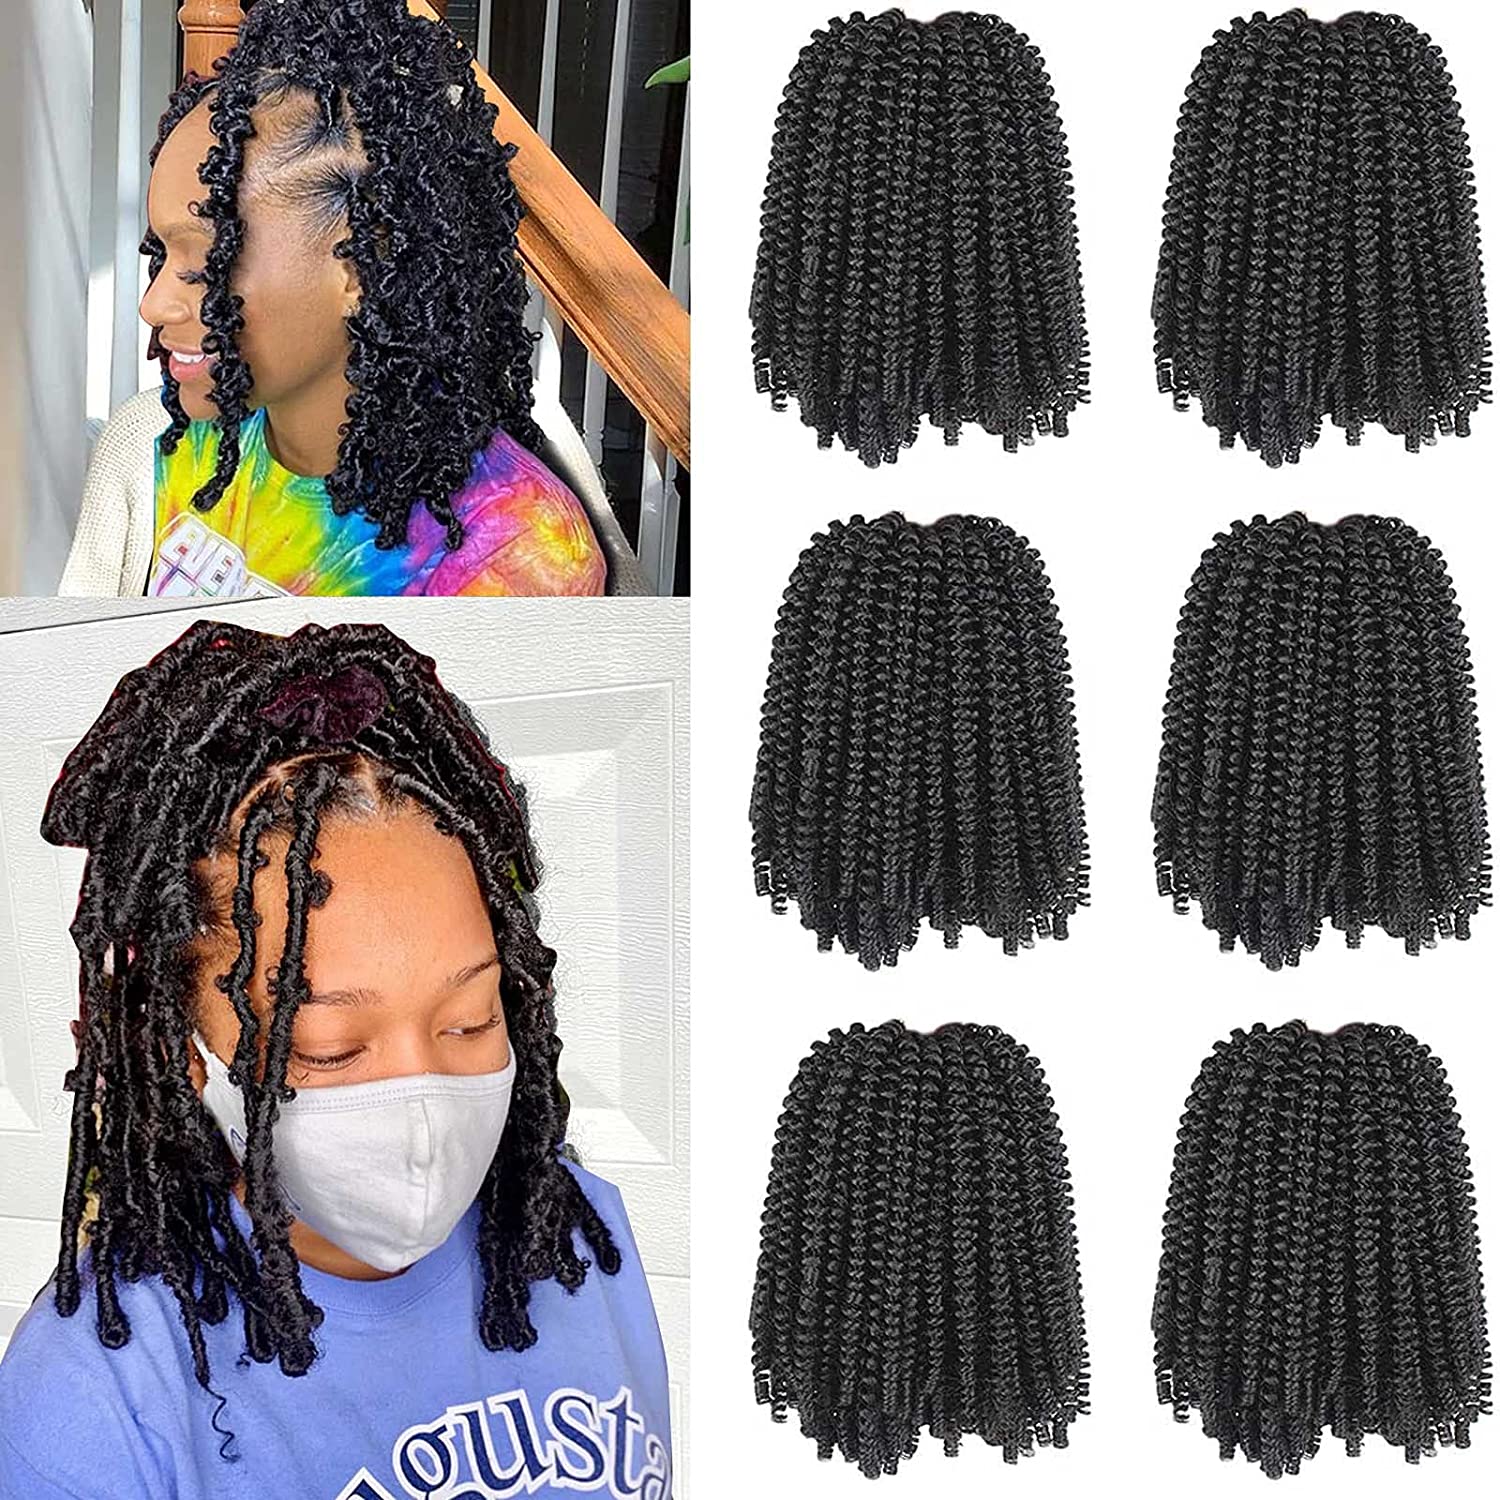 10 Inch 6 Packs Spring Twist Hair For Butterfly Faux Locks Short